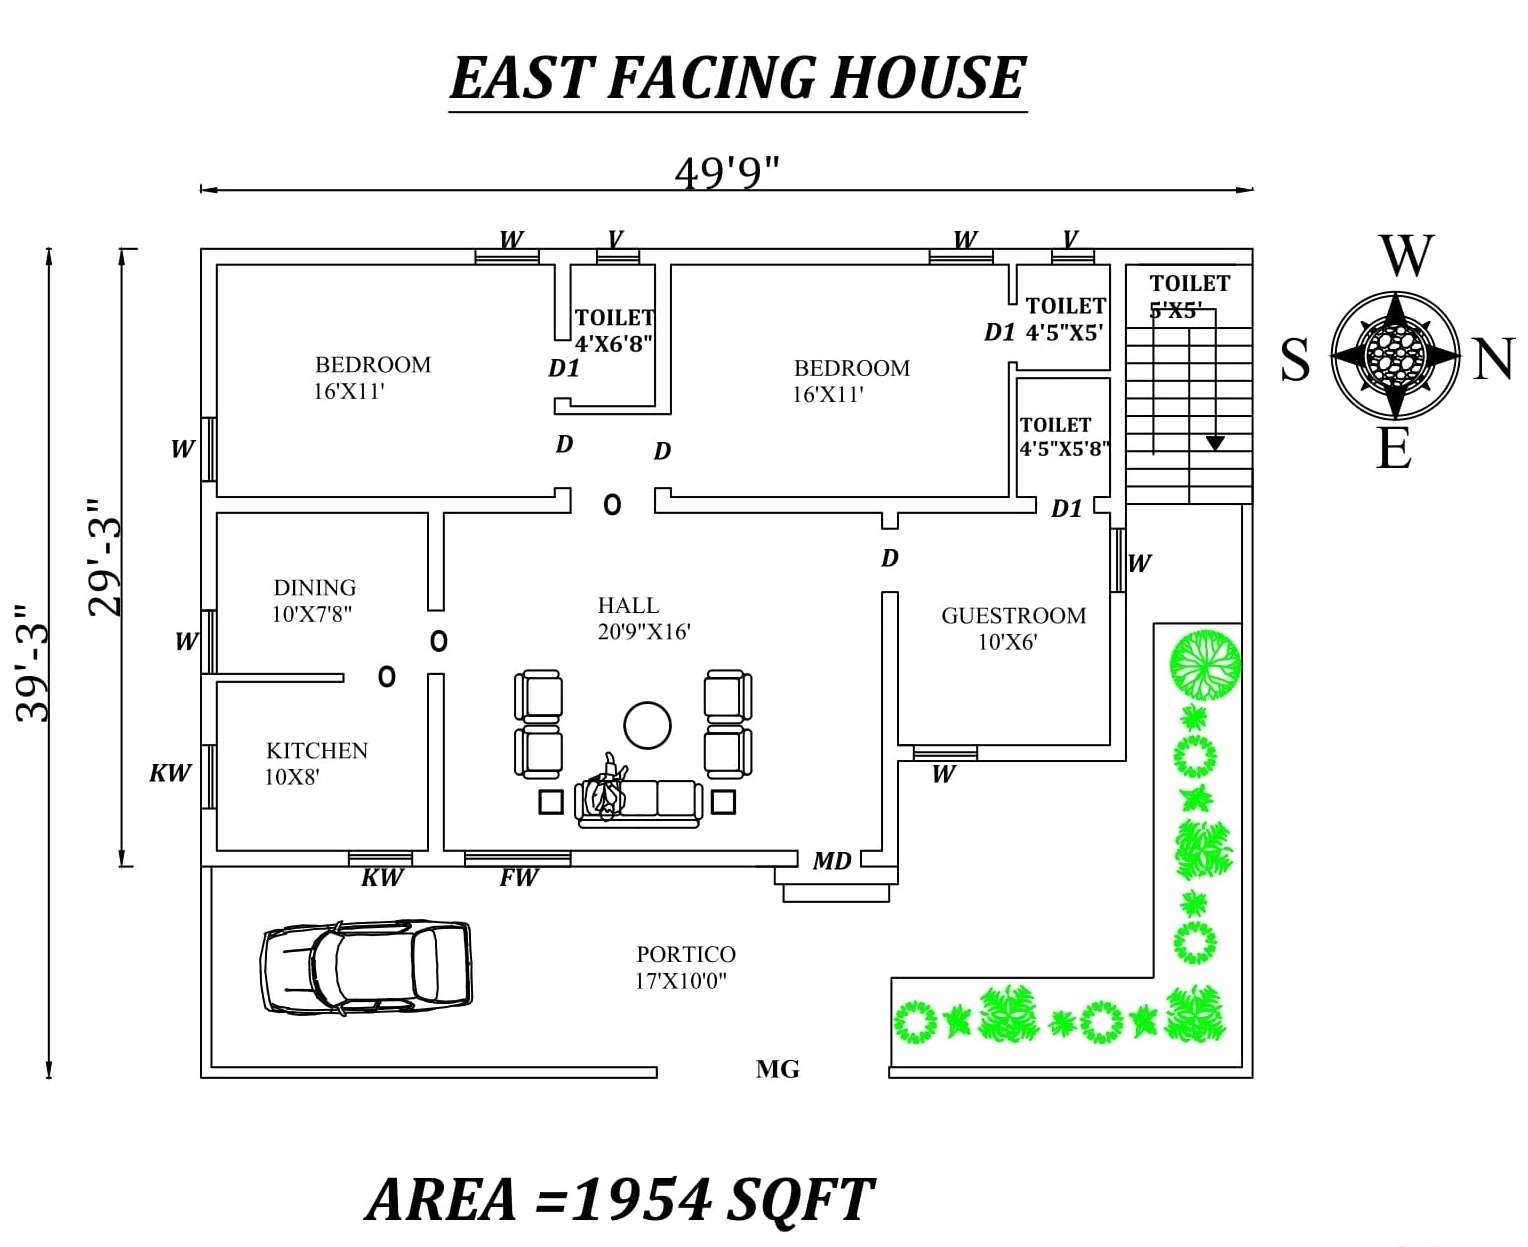 X Bhk Awesome South Facing House Plan As Per Vastu Shastra Free Hot Sex Picture